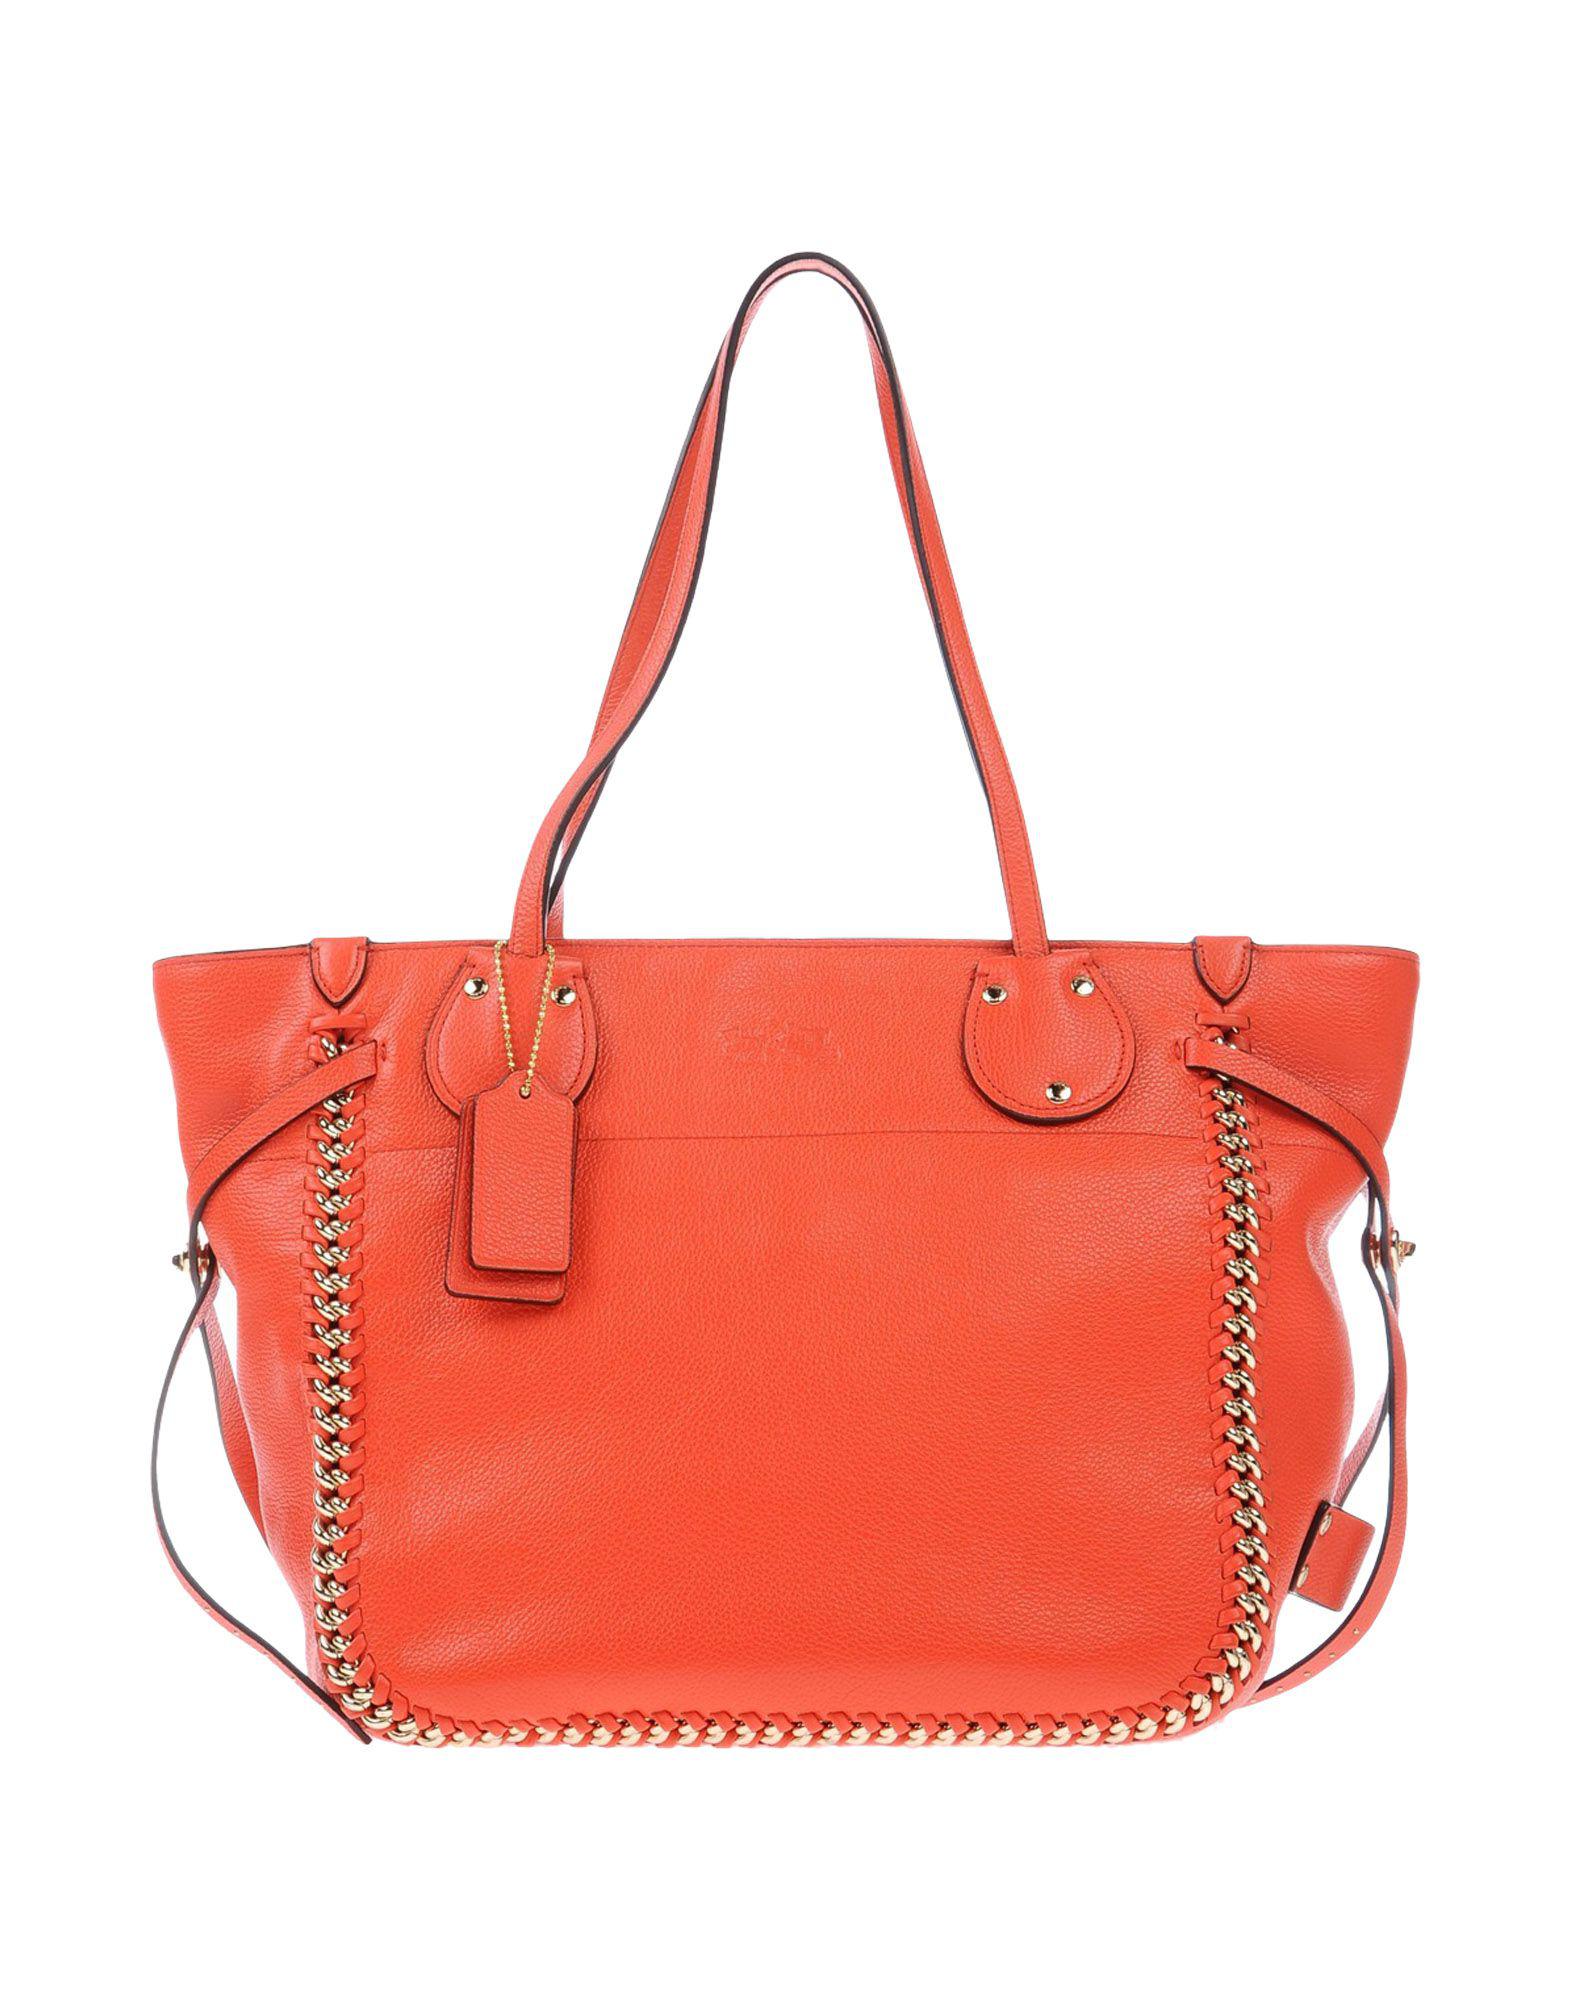 COACH Leather Handbag in Red - Lyst